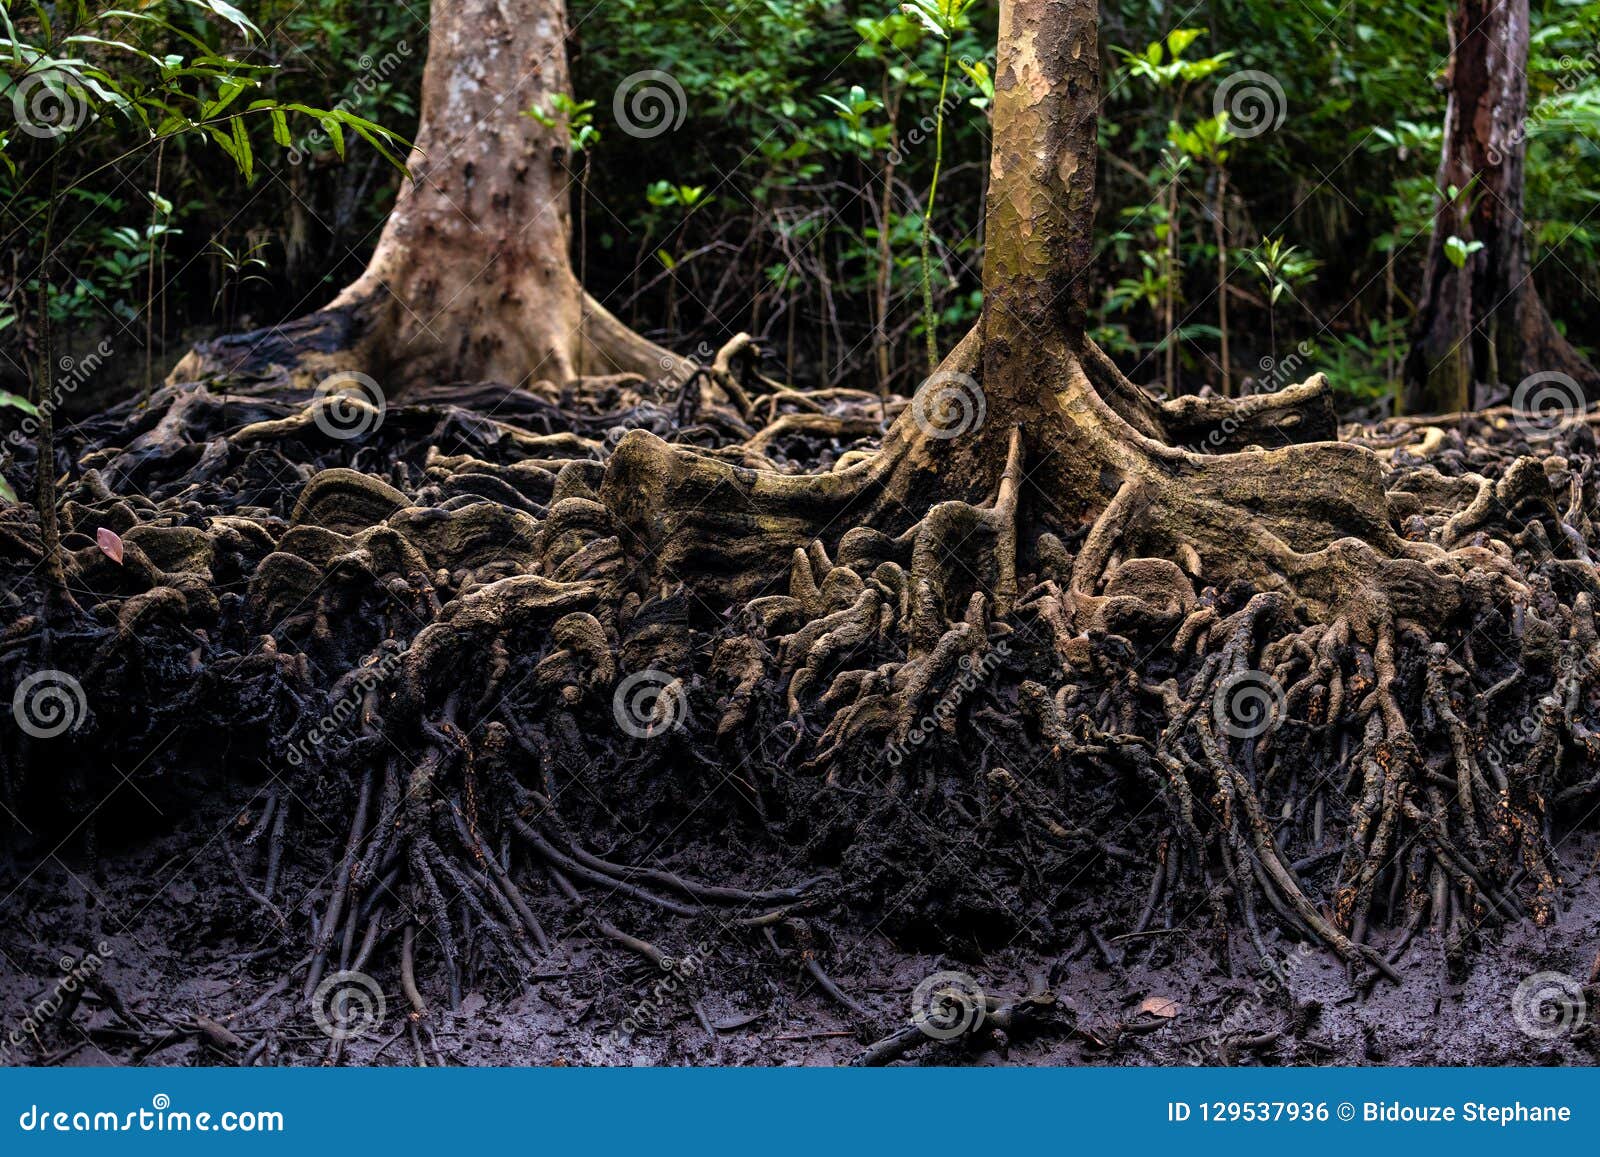 mangrove tree roots in jungle